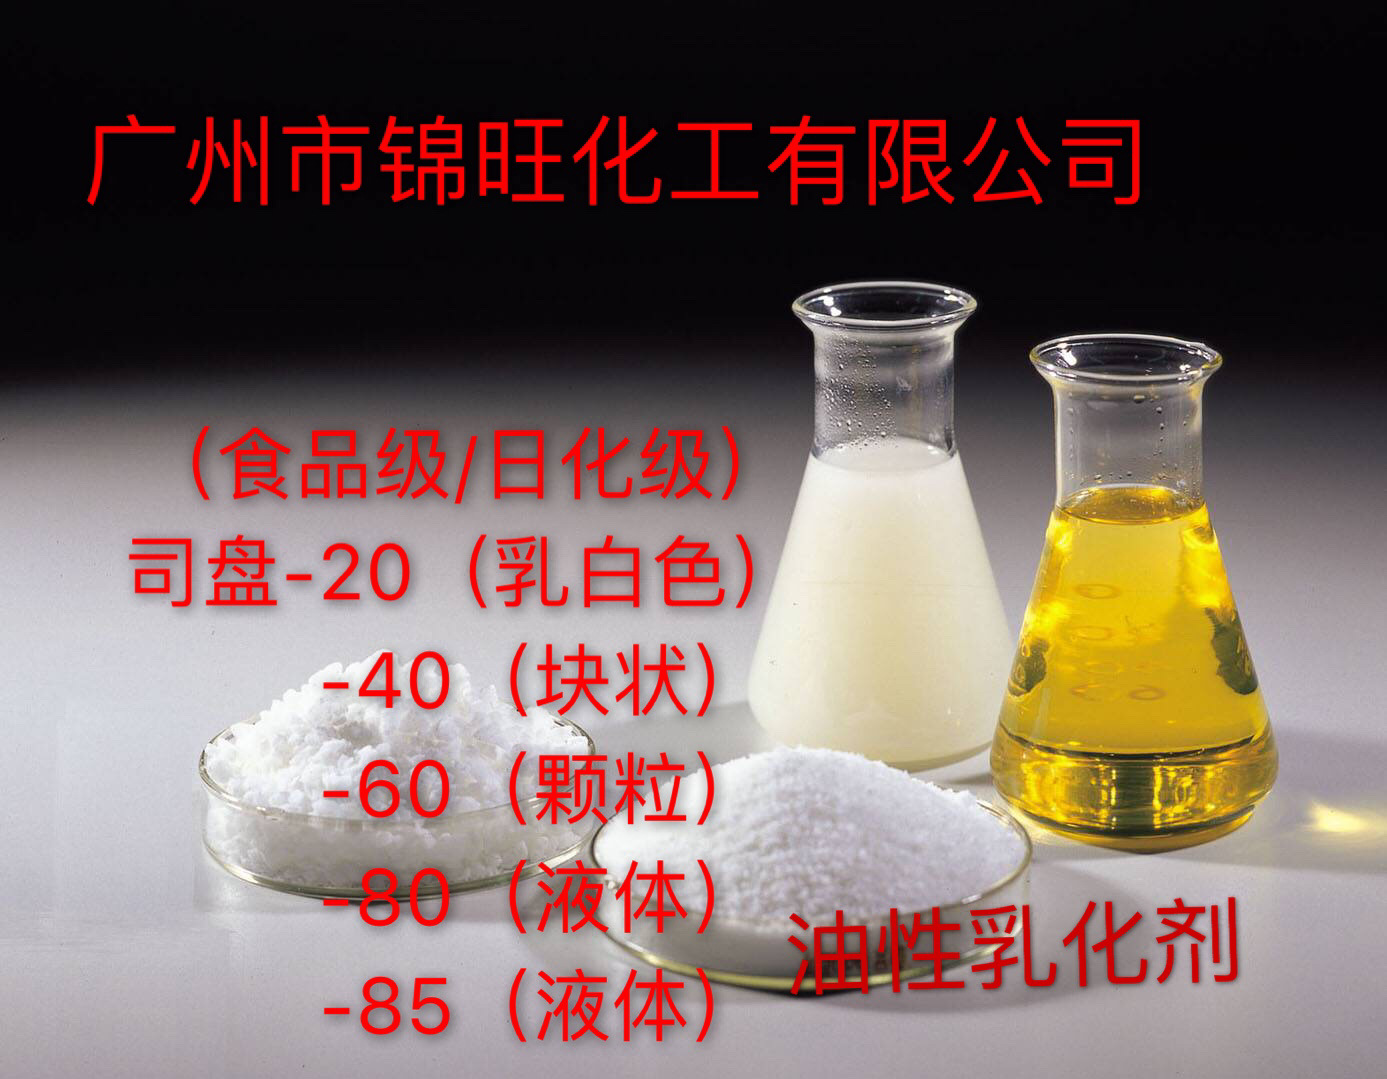 Span S-20 (food/Daily chemical grade) Oil based emulsifier (Small orders can be ordered.)